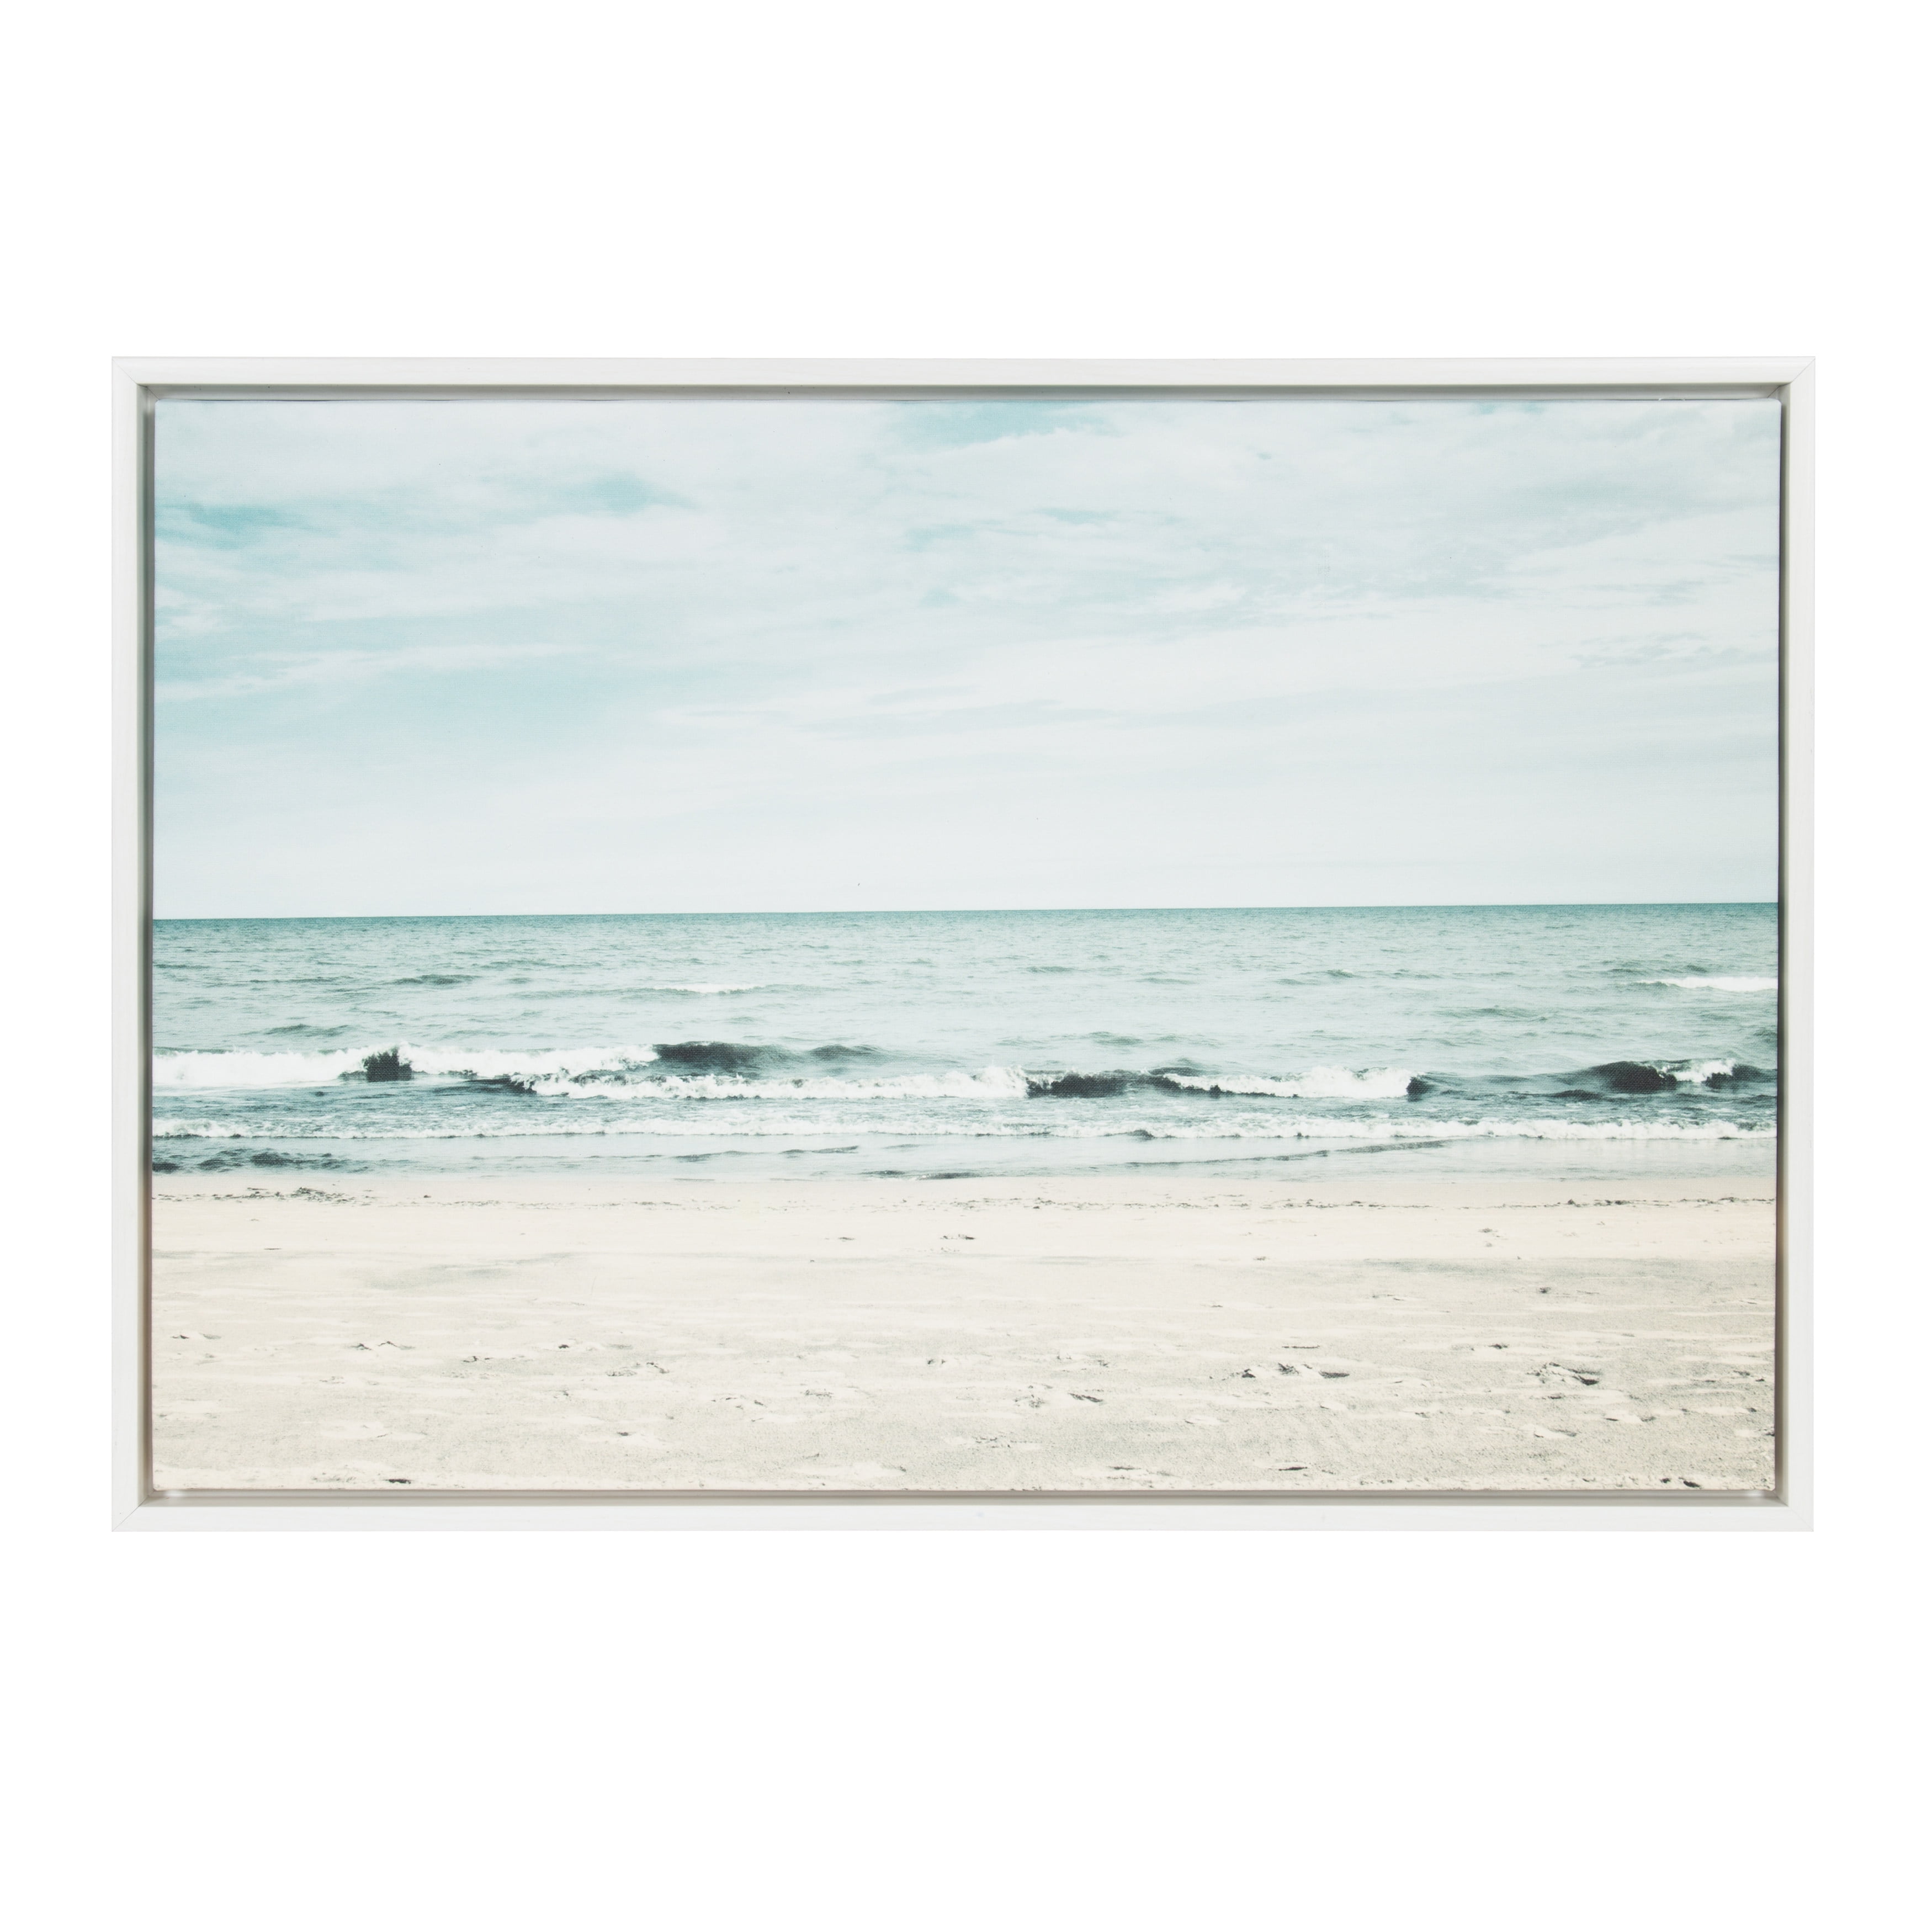 panel sekvens Normalisering Kate and Laurel Sylvie Beach Scene with Waves, Ocean Shoreline Color  Photograph, Framed Canvas Wall Art by F2 Images, 23x33 White - Walmart.com